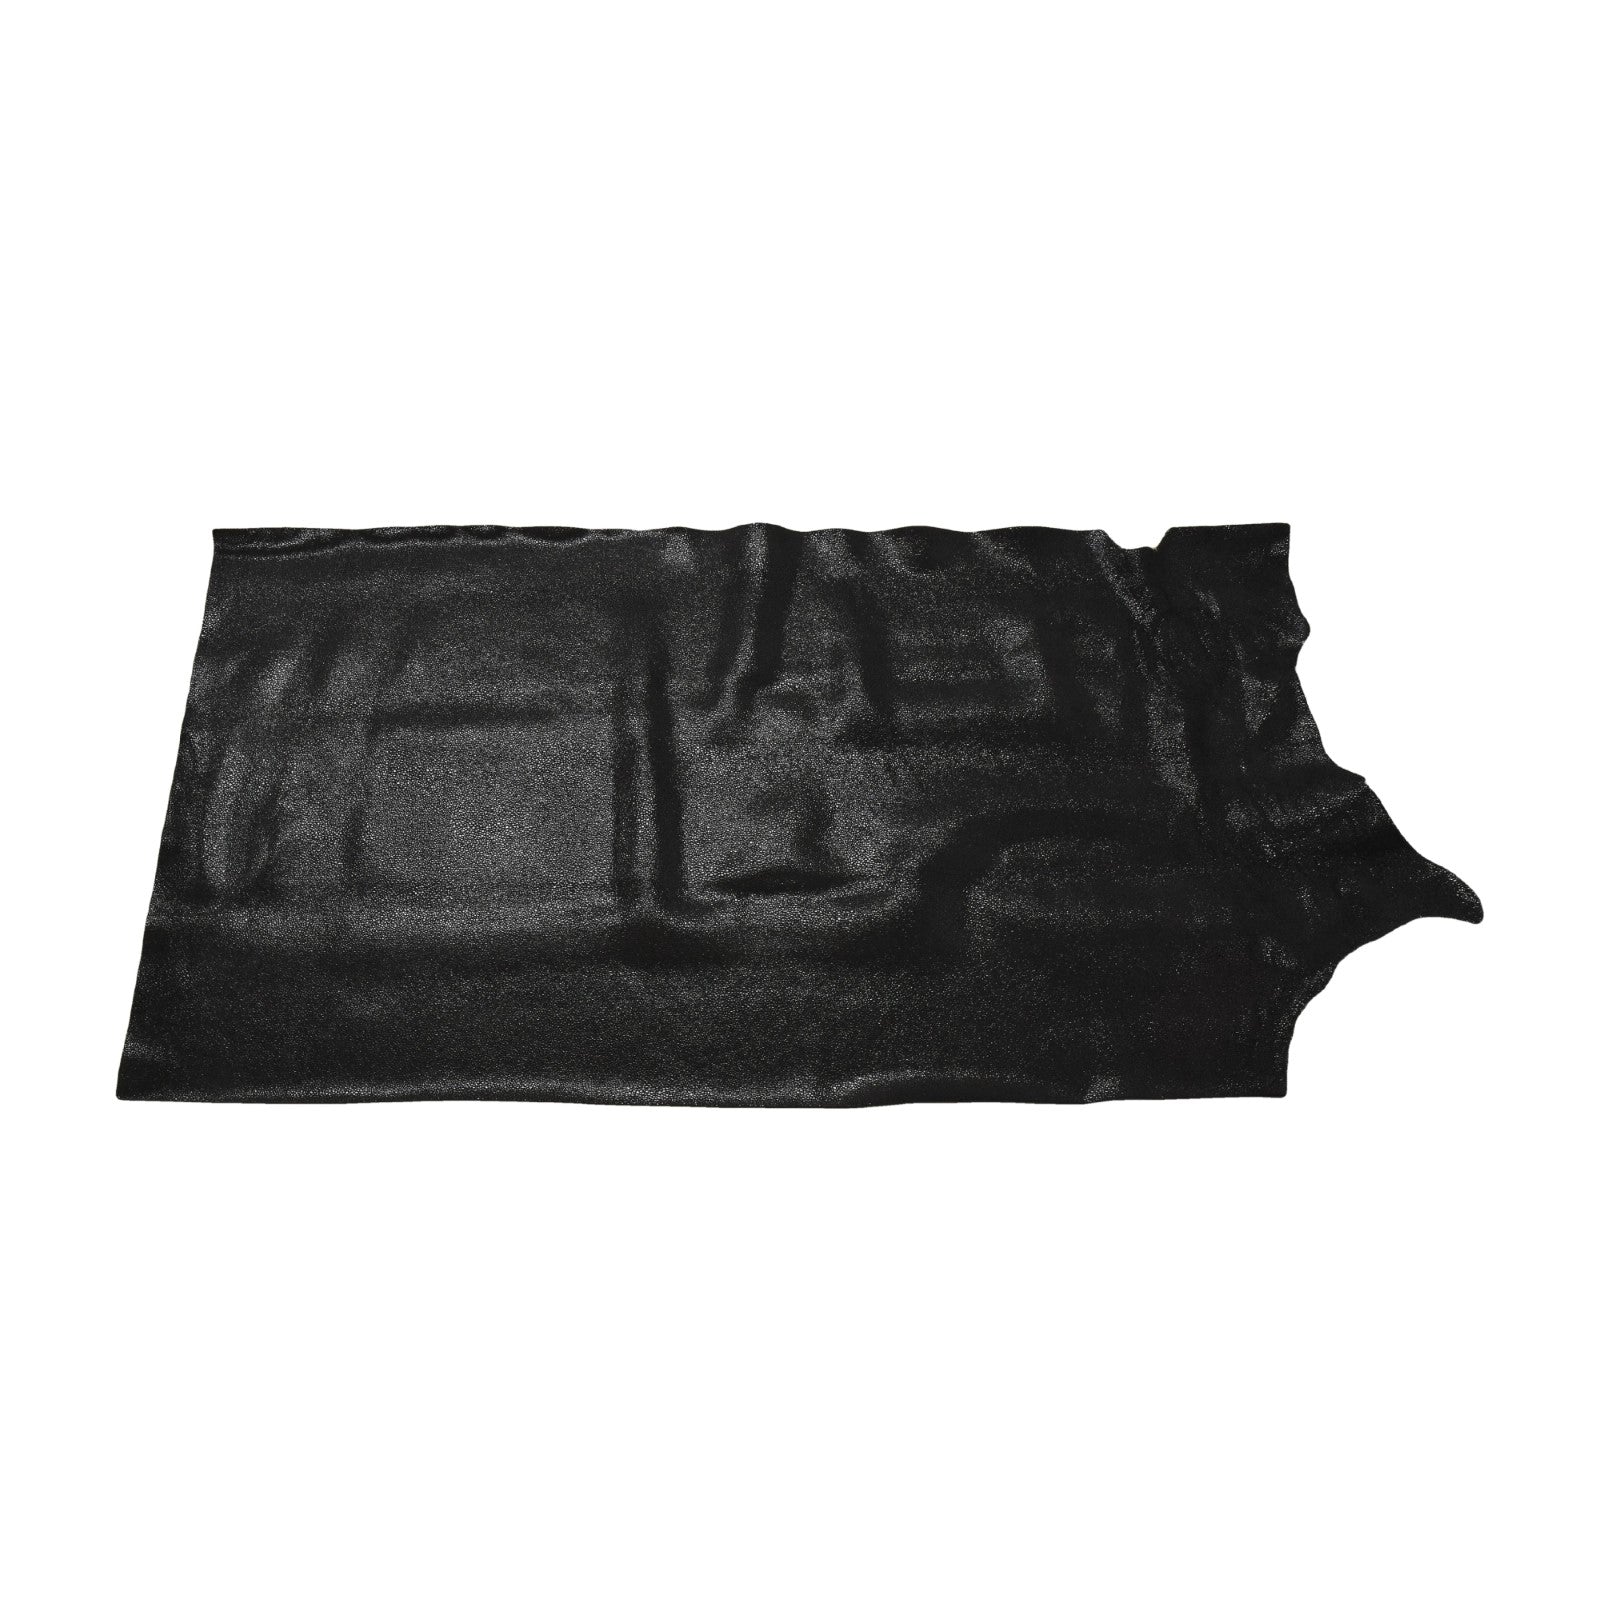 Metallic Black Sizzling Stingray 2-3 oz Cow Hides, Middle Piece / 6.5-7.5 Sq Ft | The Leather Guy